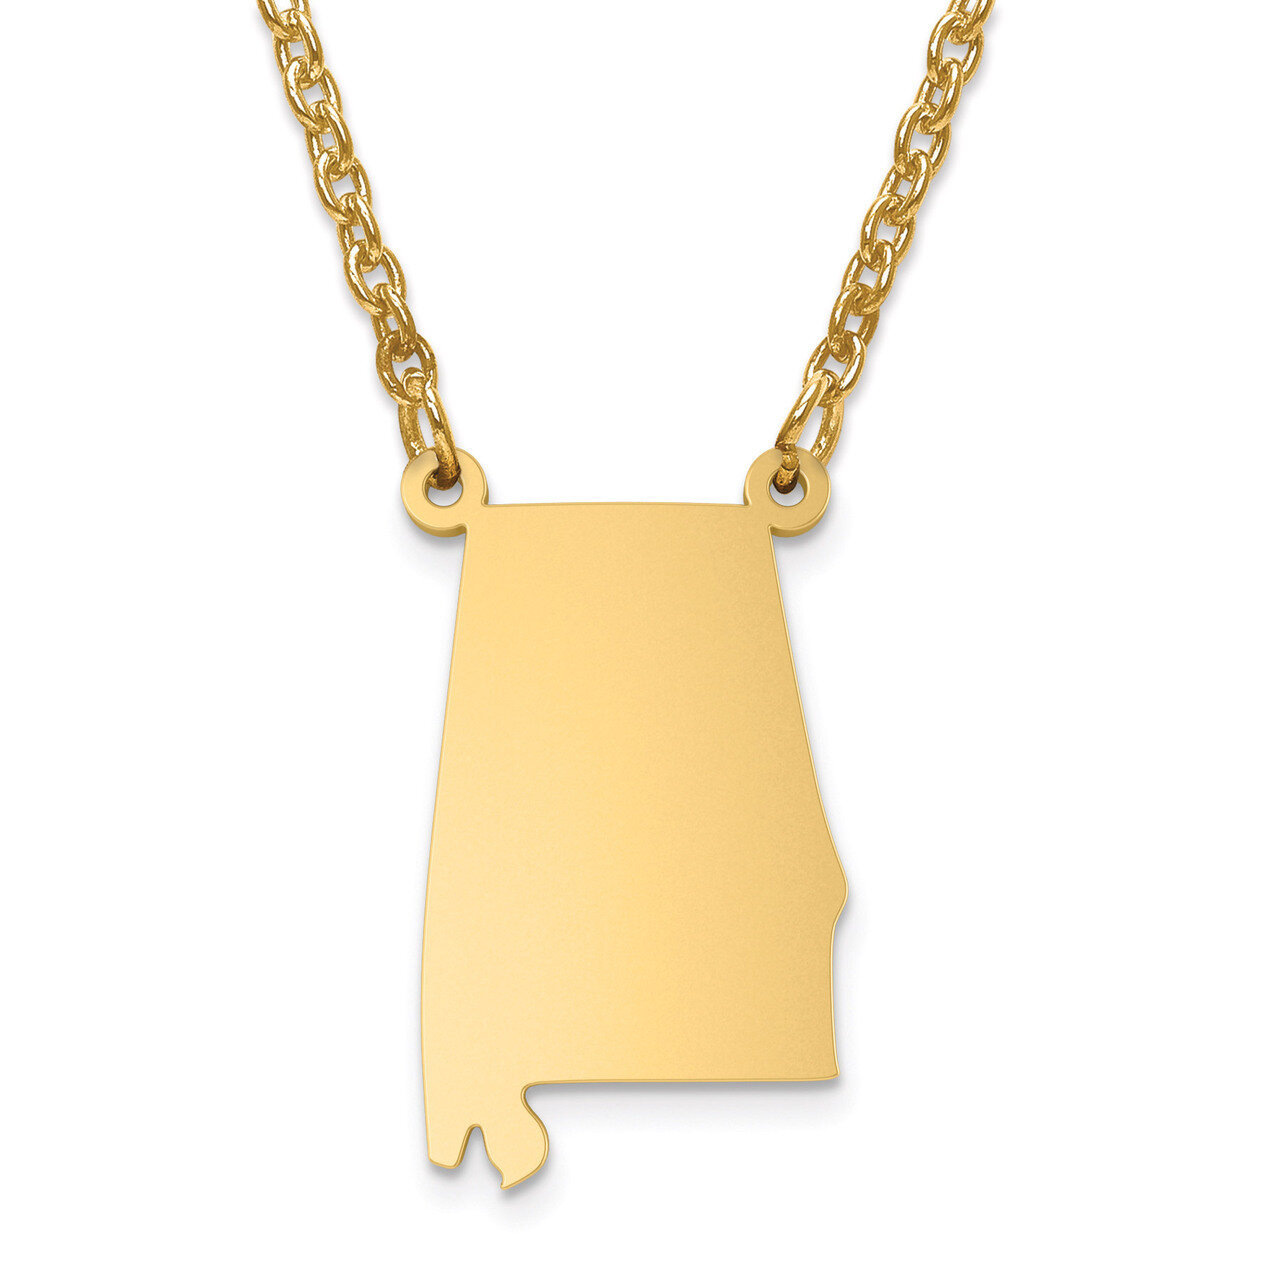 Alabama State Pendant with Chain Engravable Gold-plated on Sterling Silver